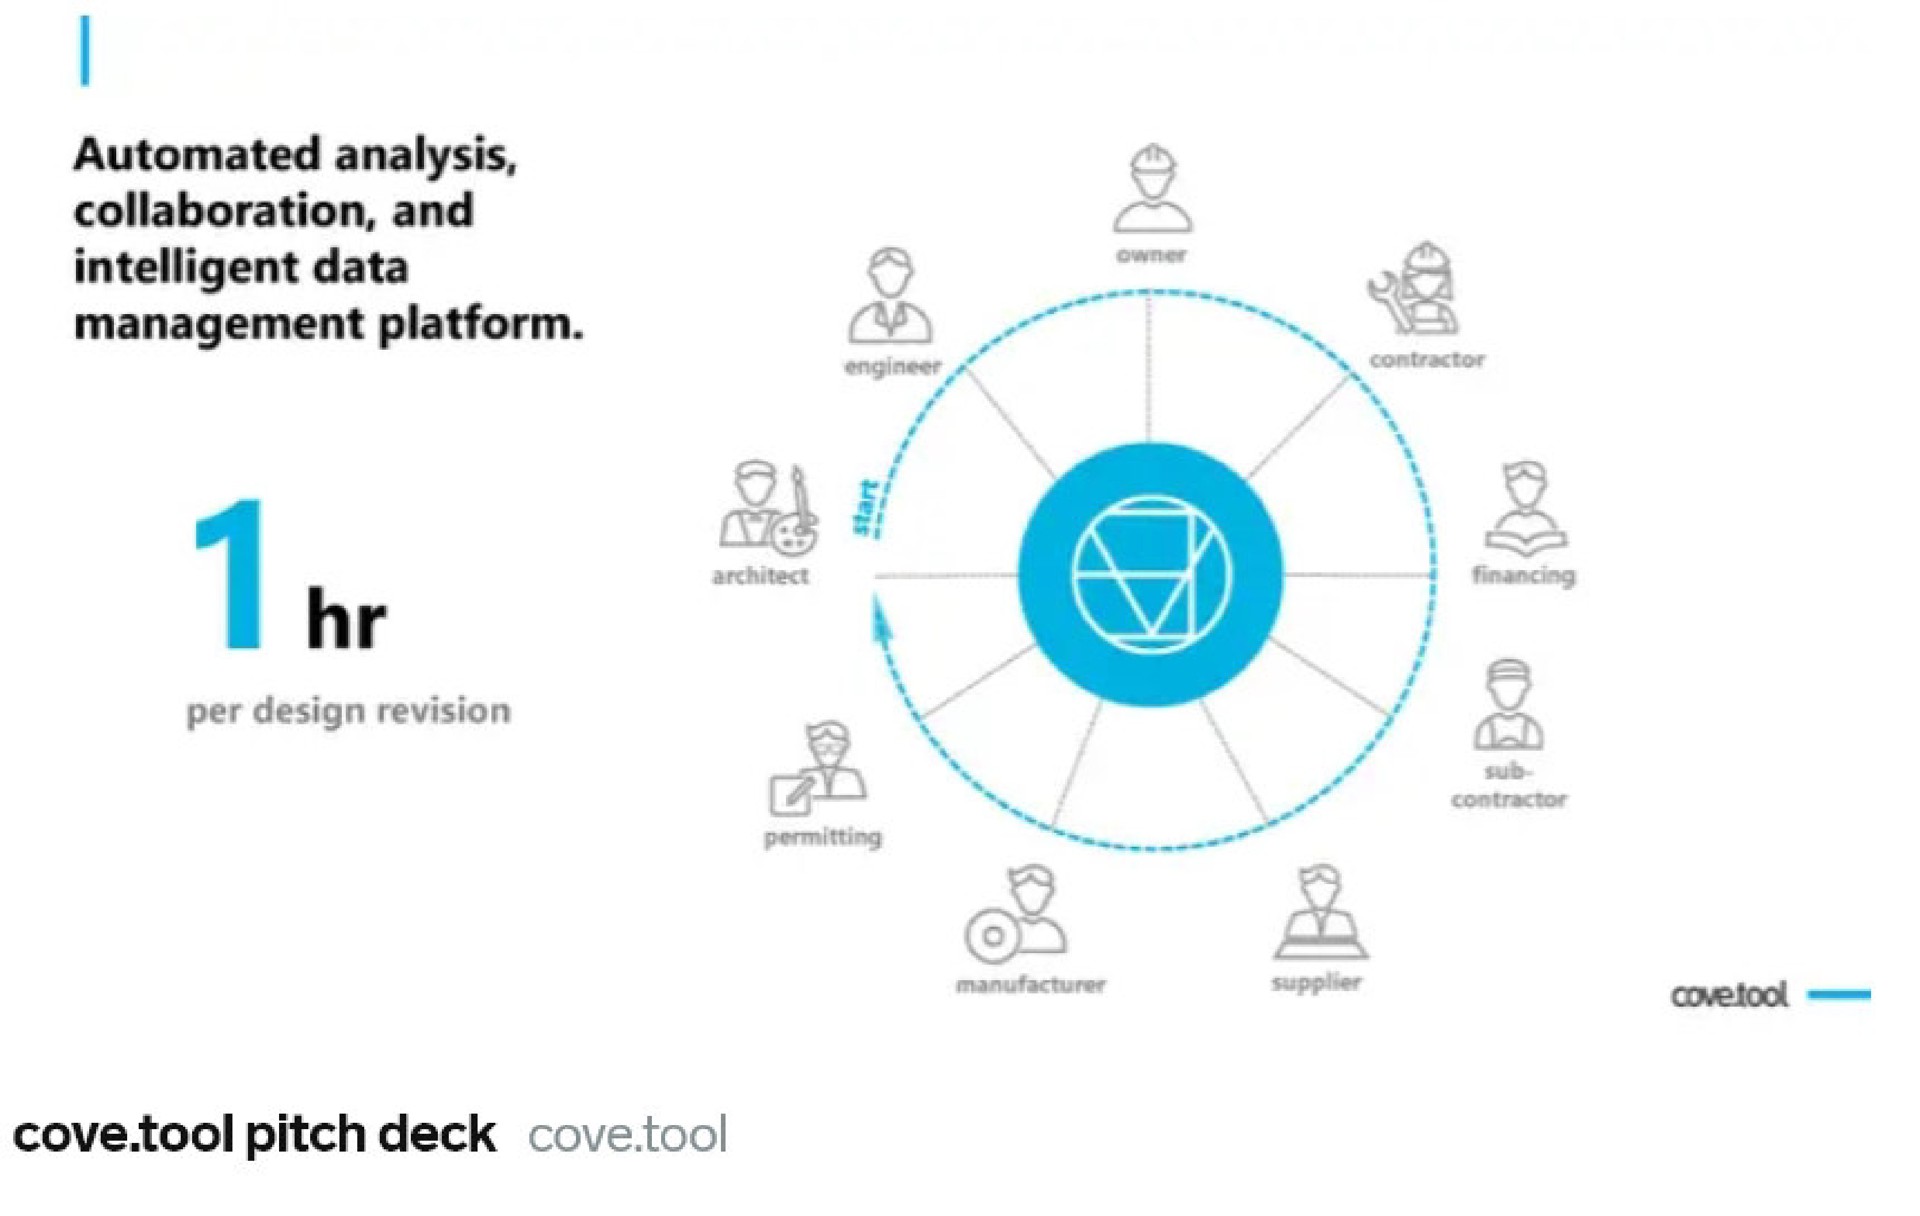 analysis collaboration and intelligent data management platform cove tool pitch deck cove too | Covetool